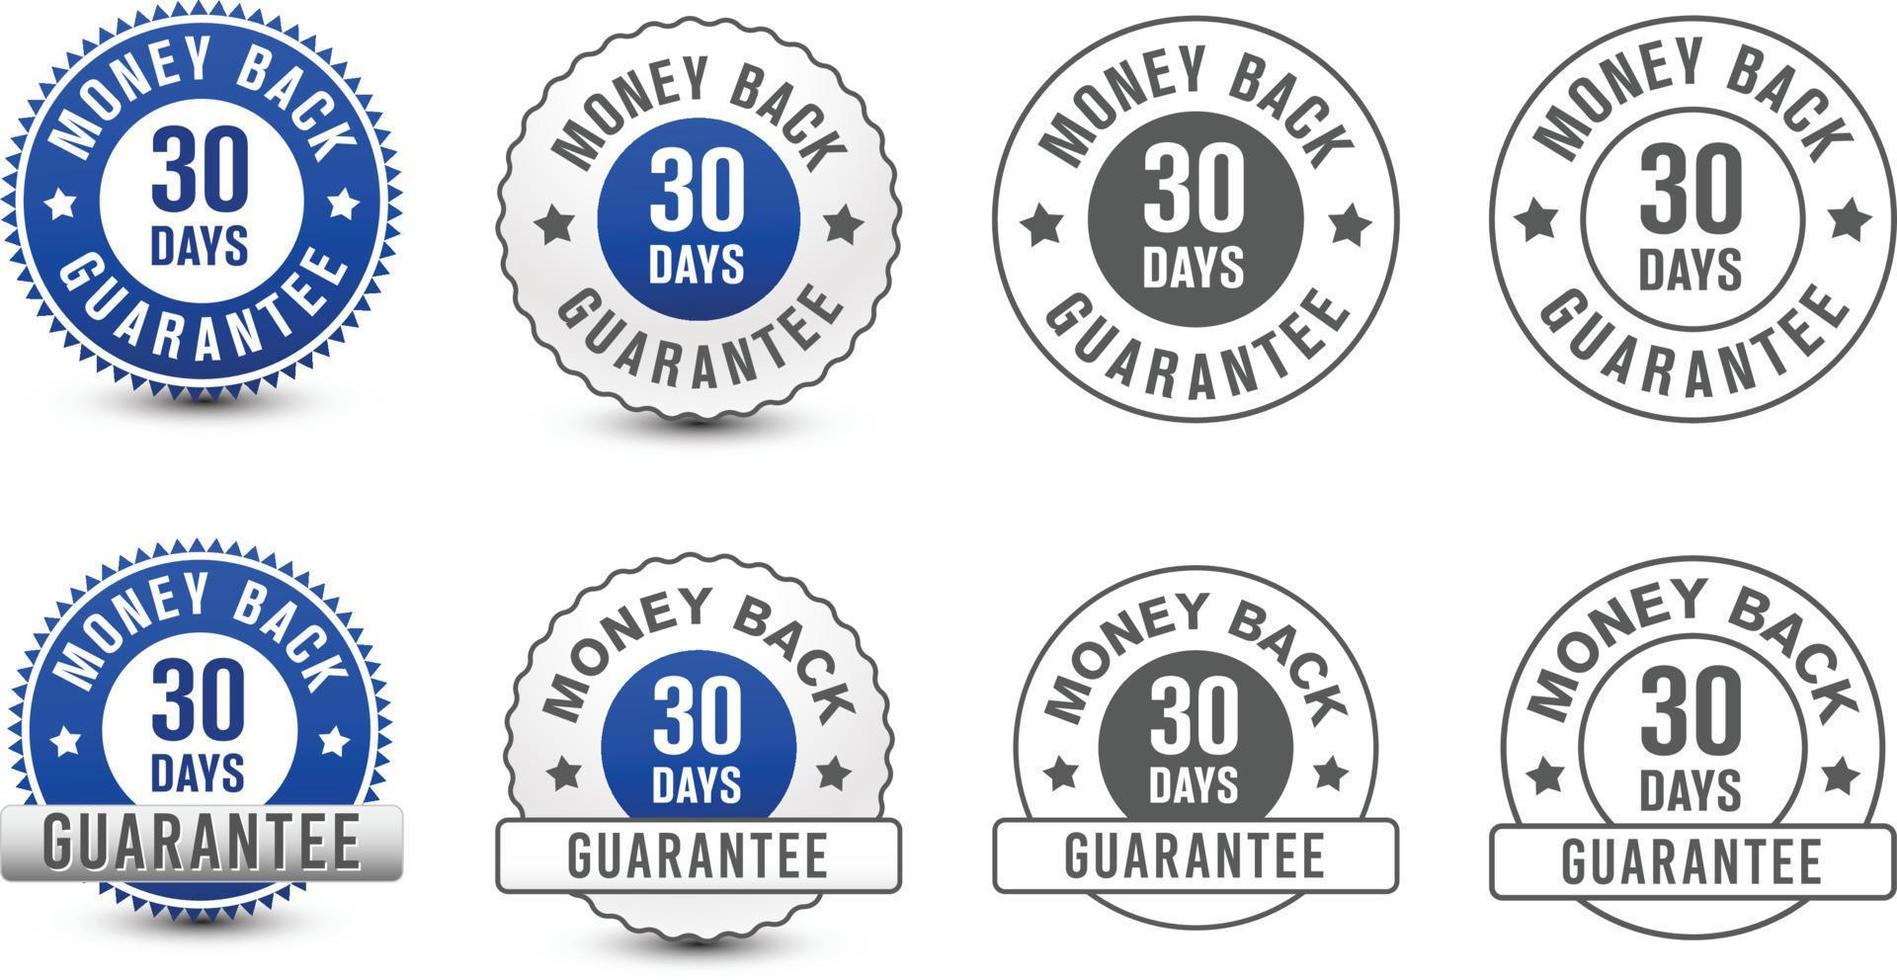 Different type of 30 days money back guarantee badge set isolated on white background. vector design.